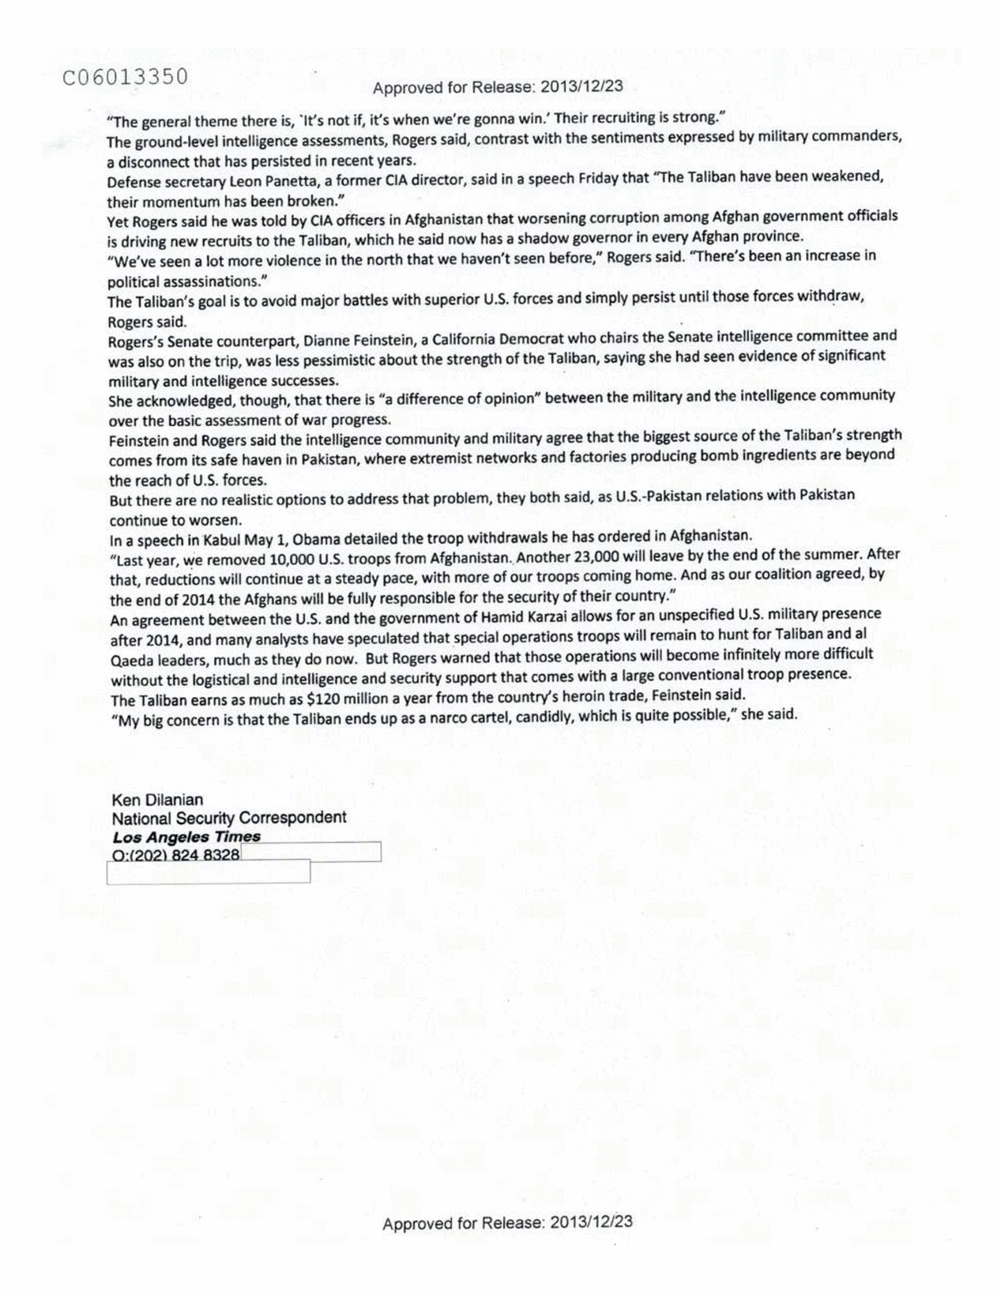 Page 264 from Email Correspondence Between Reporters and CIA Flacks